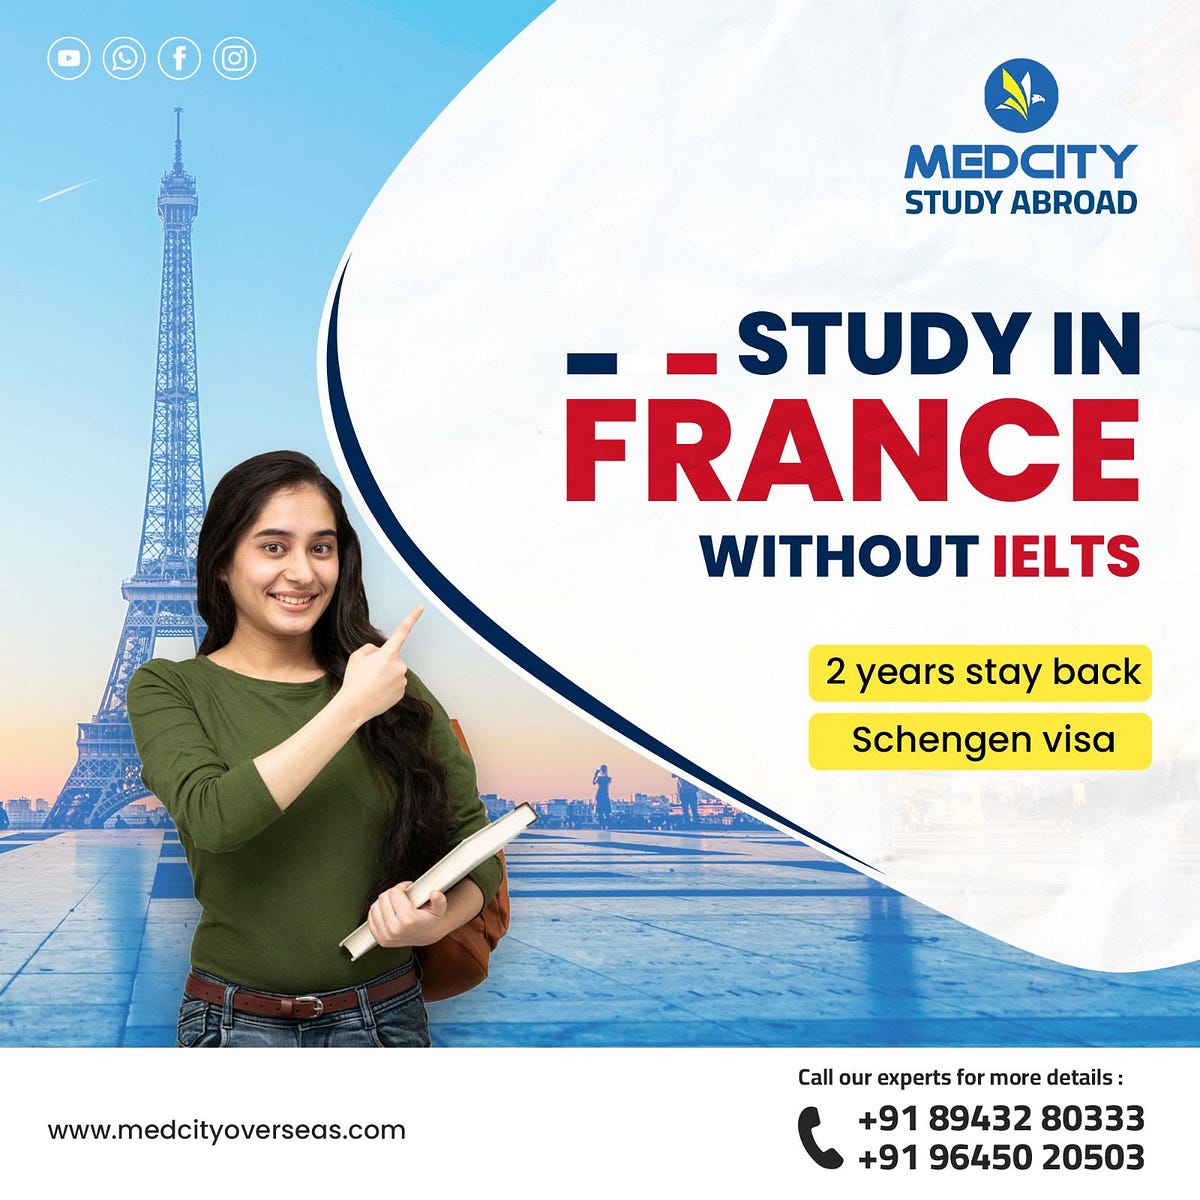 Study in France without IELTS - Medcity Overseas Corporation - Medium